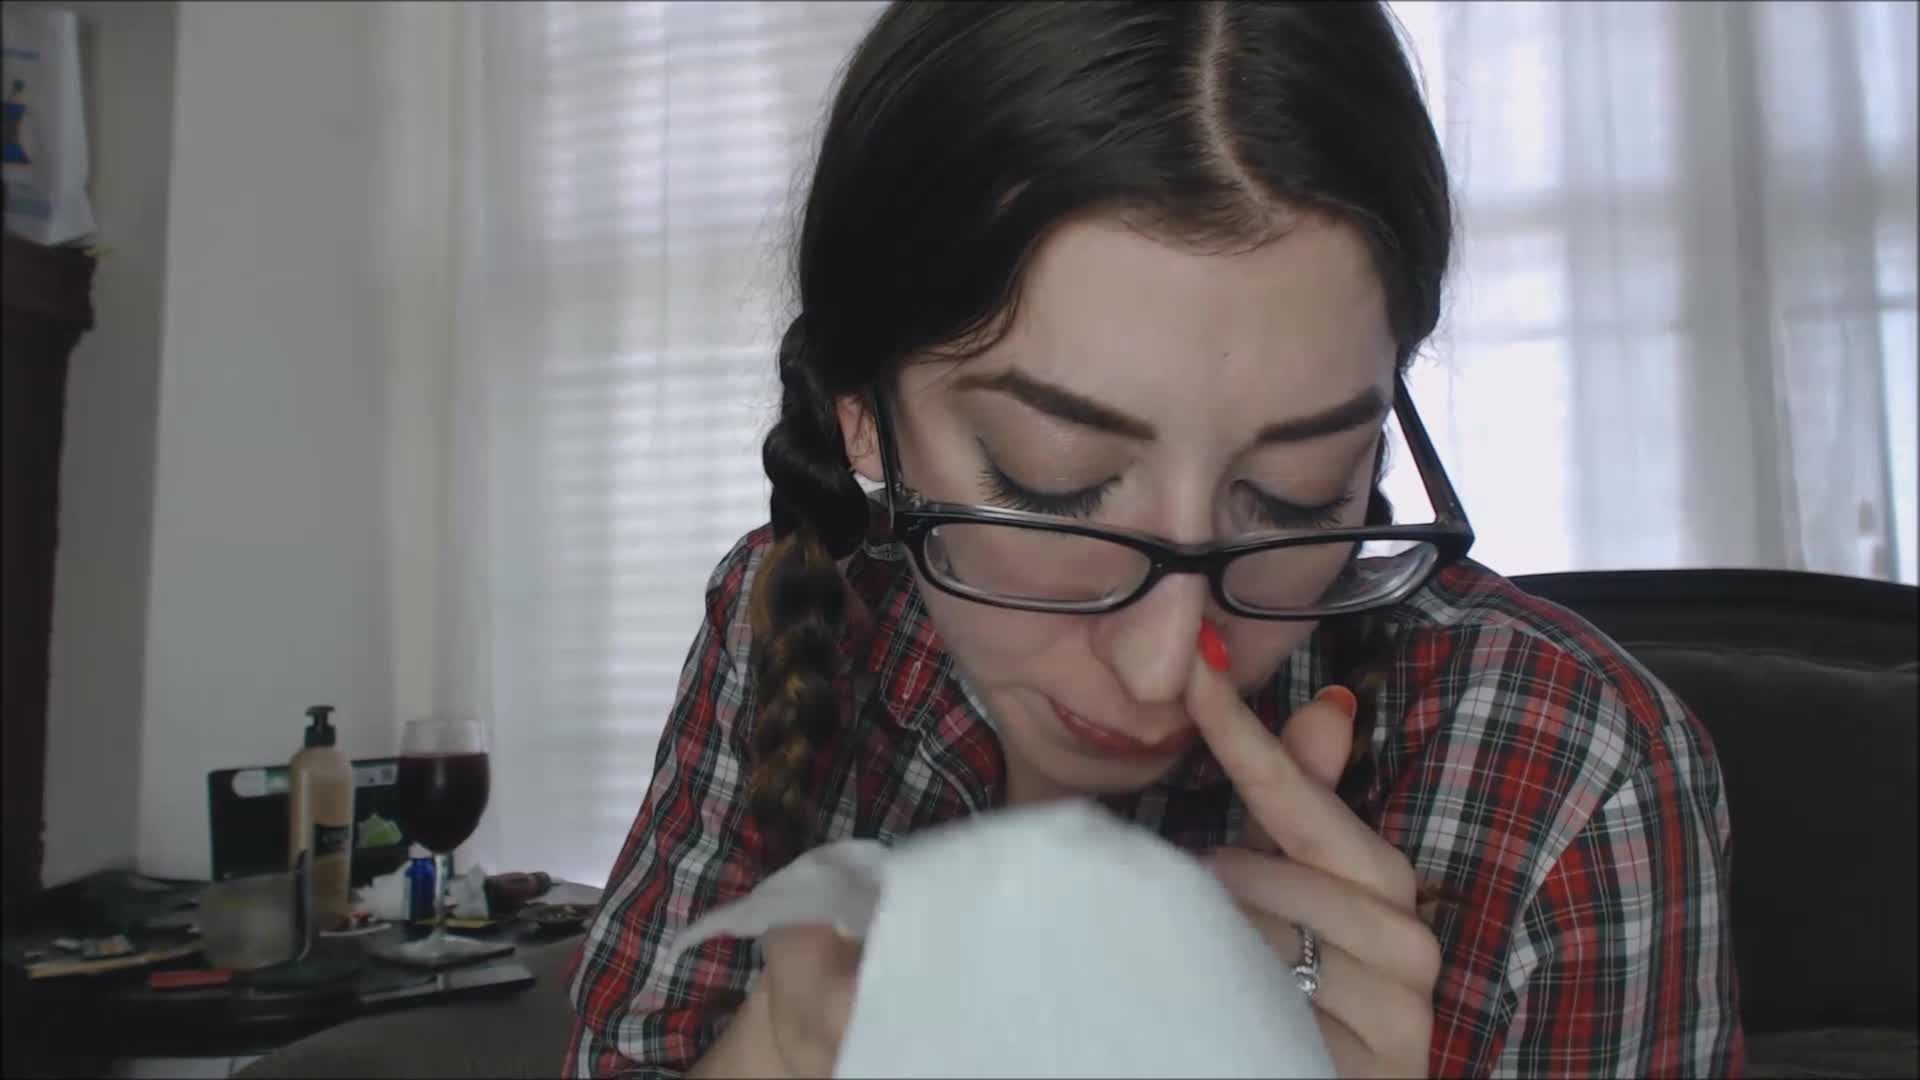 Sammy Blows Her Nose and Blows Snot